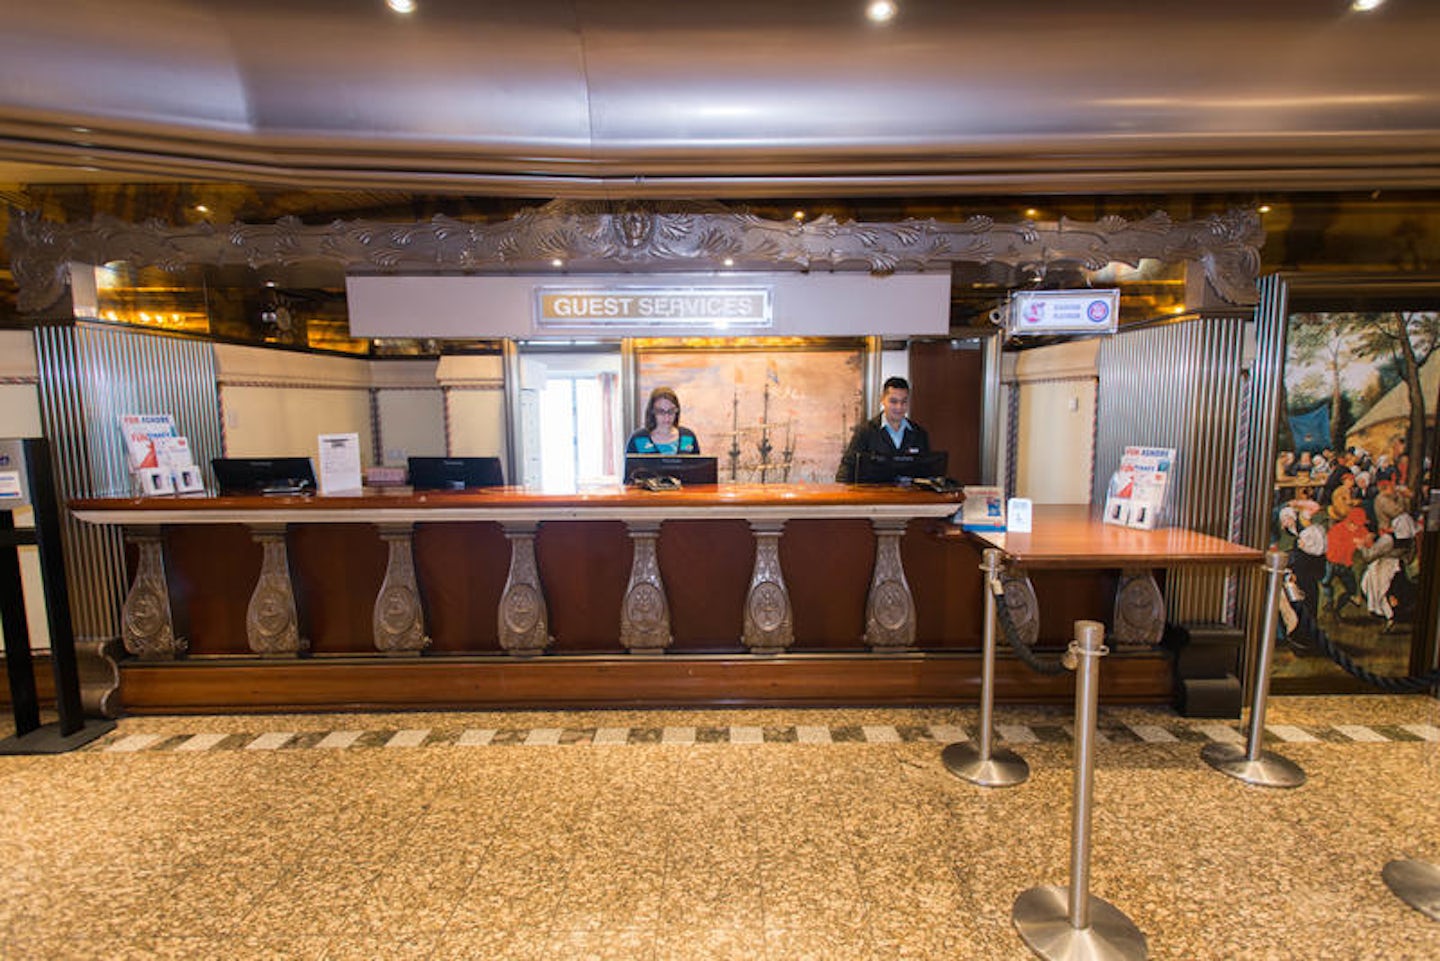 Guest Services on Carnival Pride